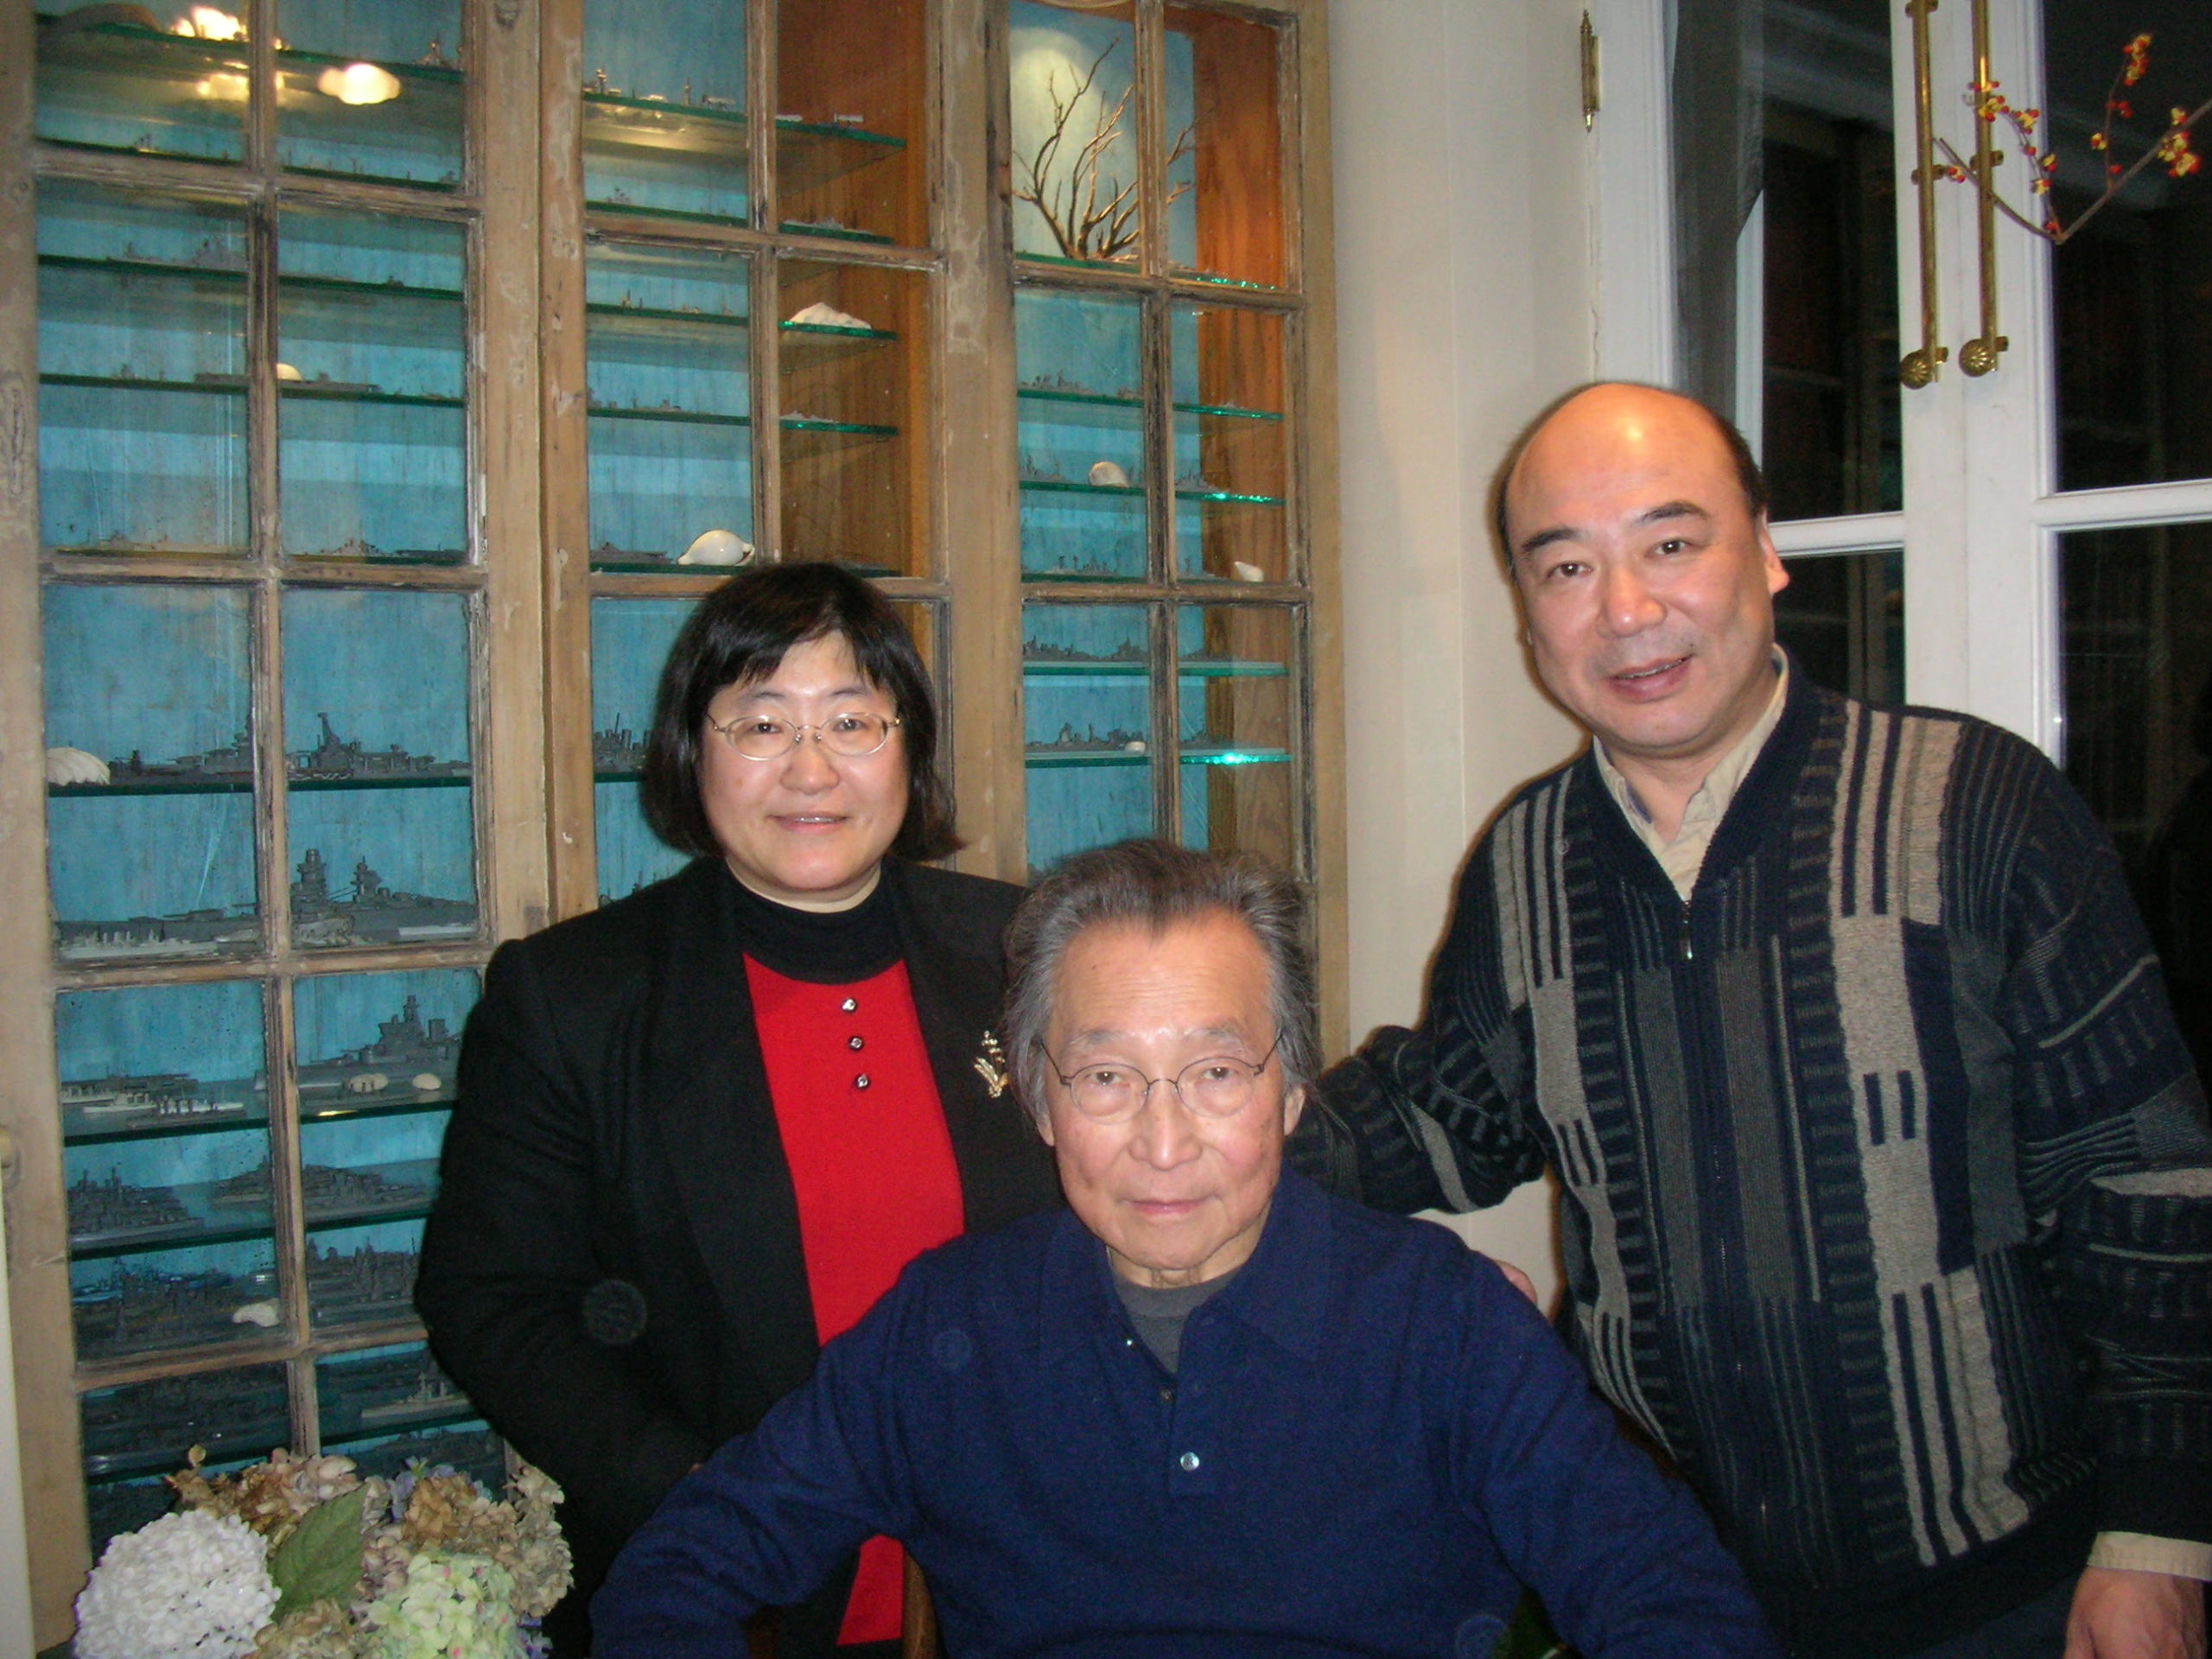 Three people posing together for a photo